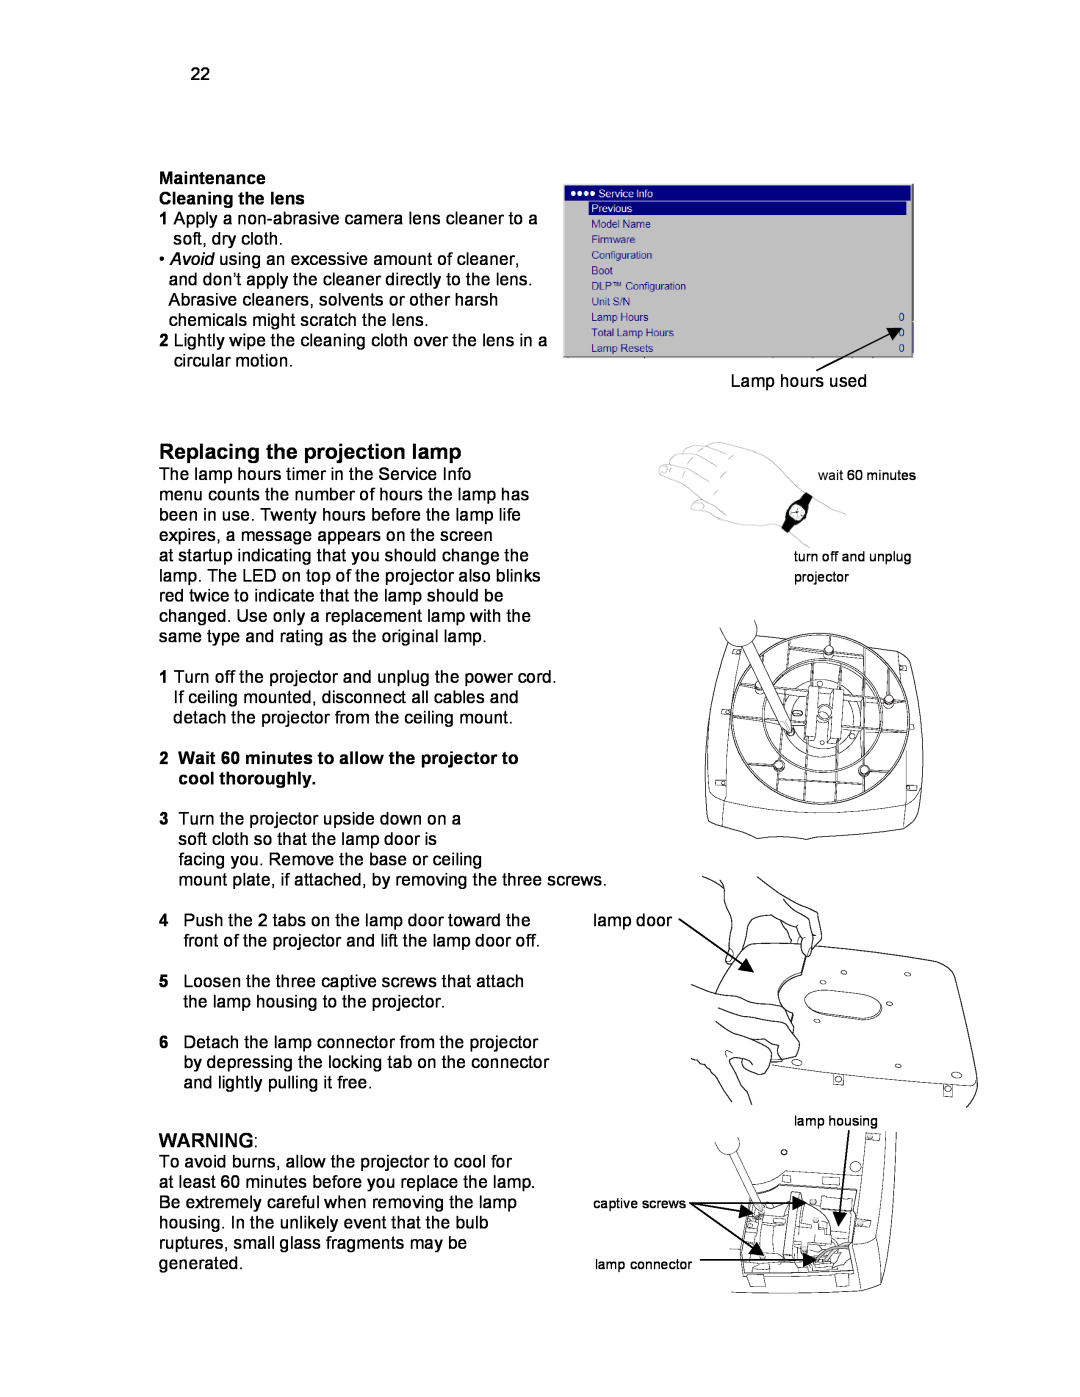 Knoll Systems HD108, HD290, HD178 user manual Replacing the projection lamp, Maintenance Cleaning the lens 